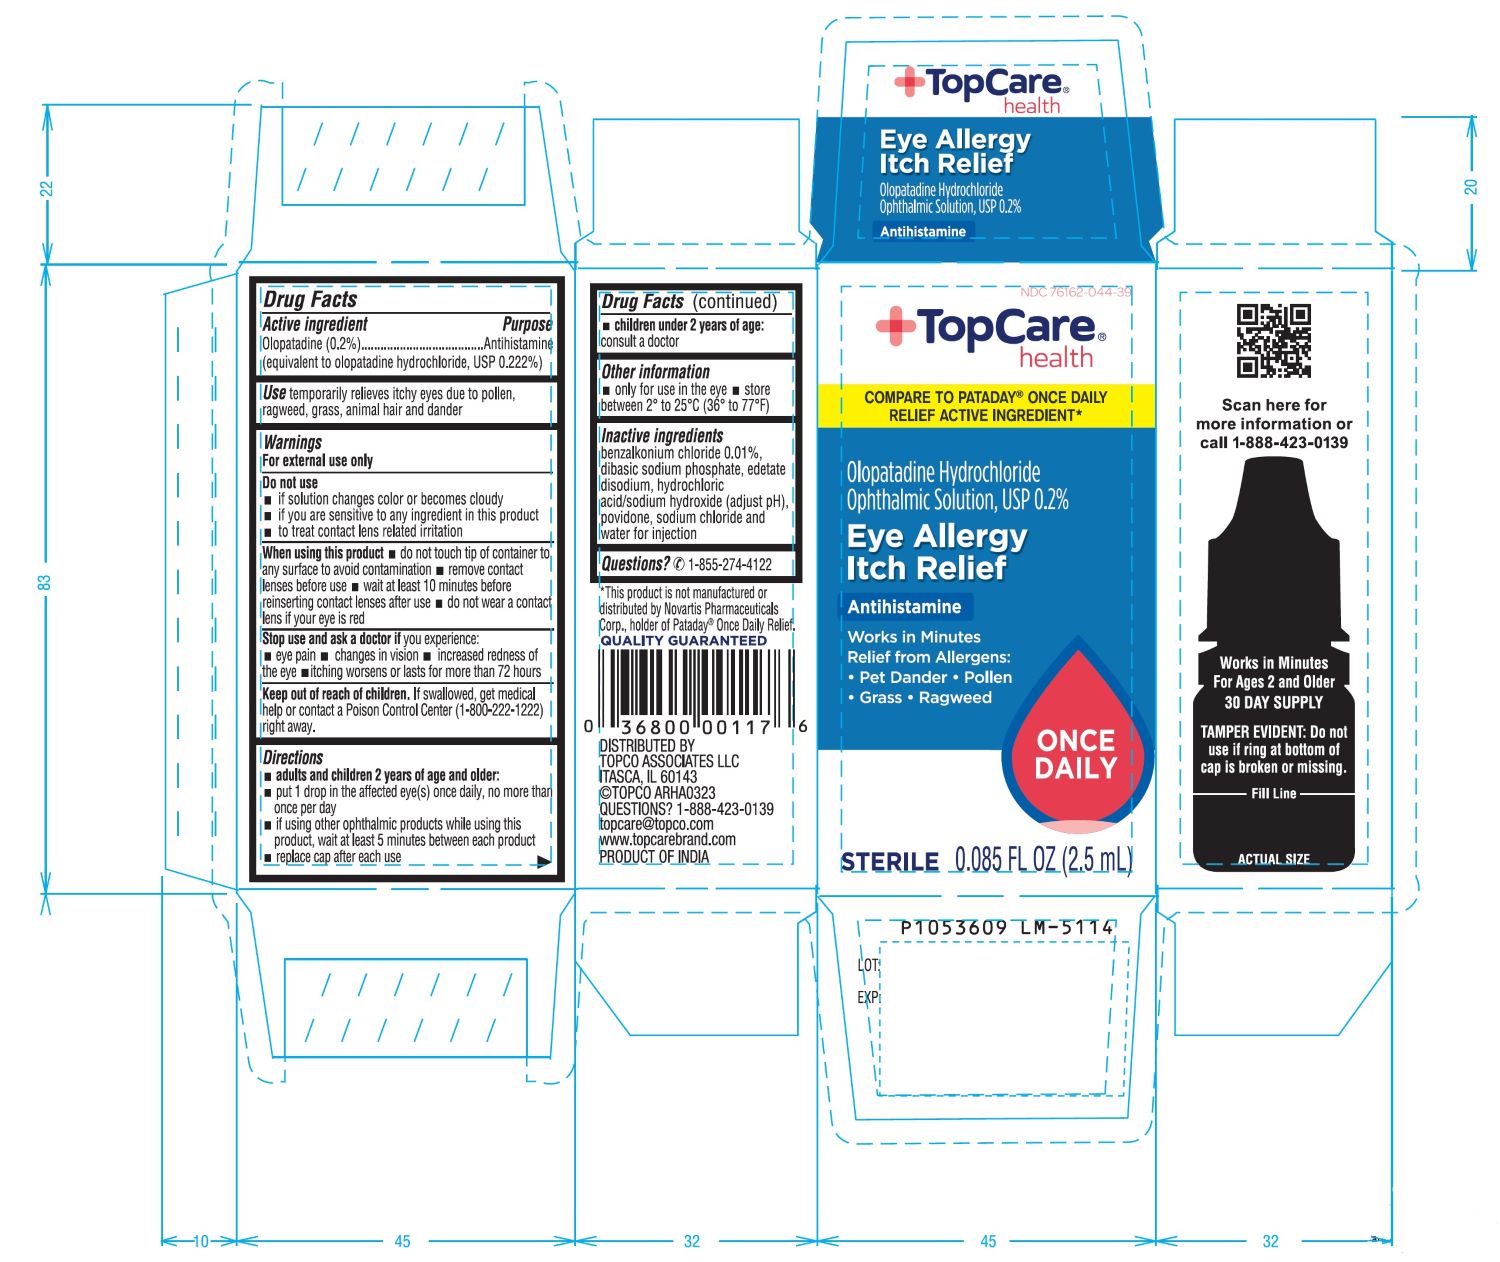 PACKAGE LABEL-PRINCIPAL DISPLAY PANEL-0.2% (2.5 mL Container Carton)